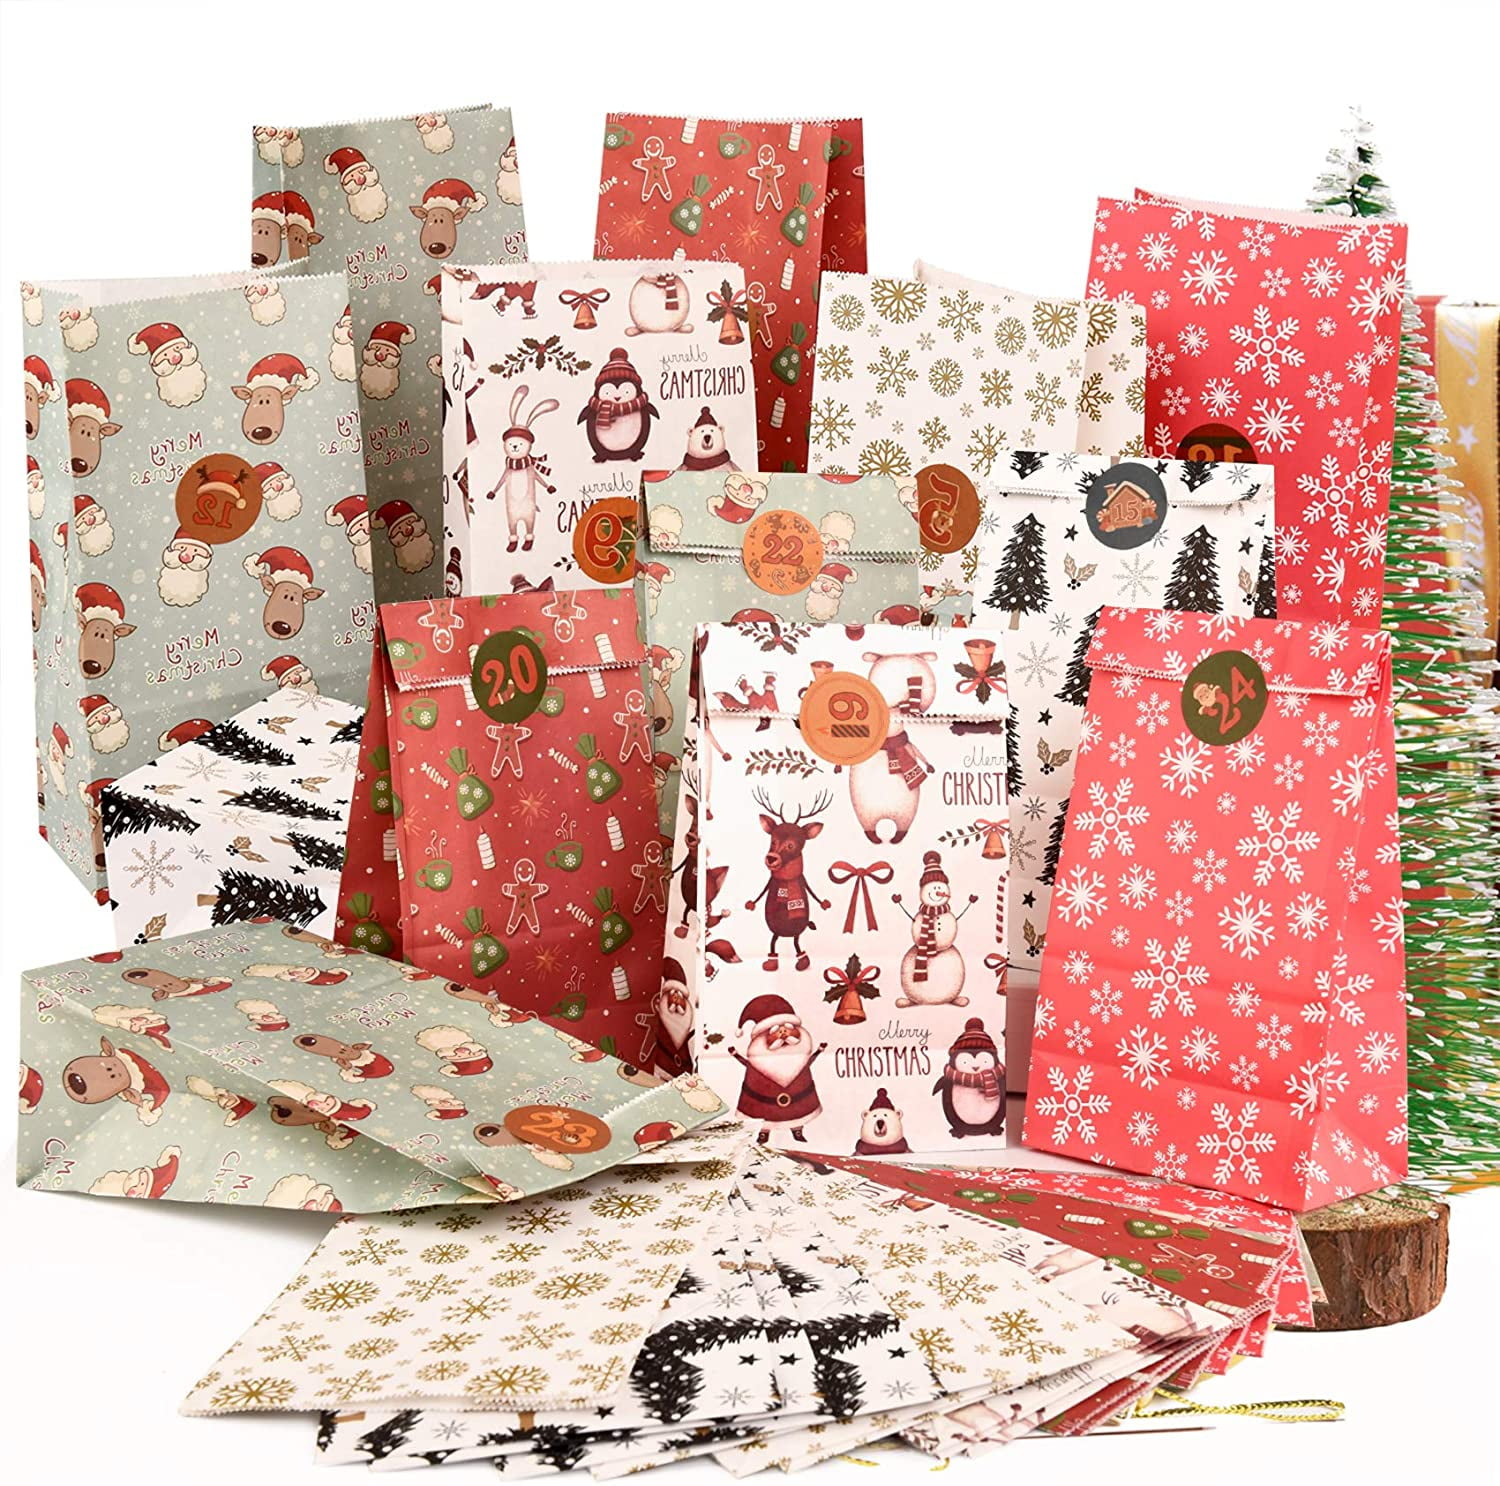 Wrapped Treat... Details about   Christmas Gift Bags 24 Packs with 24 Number Tag Stickers 